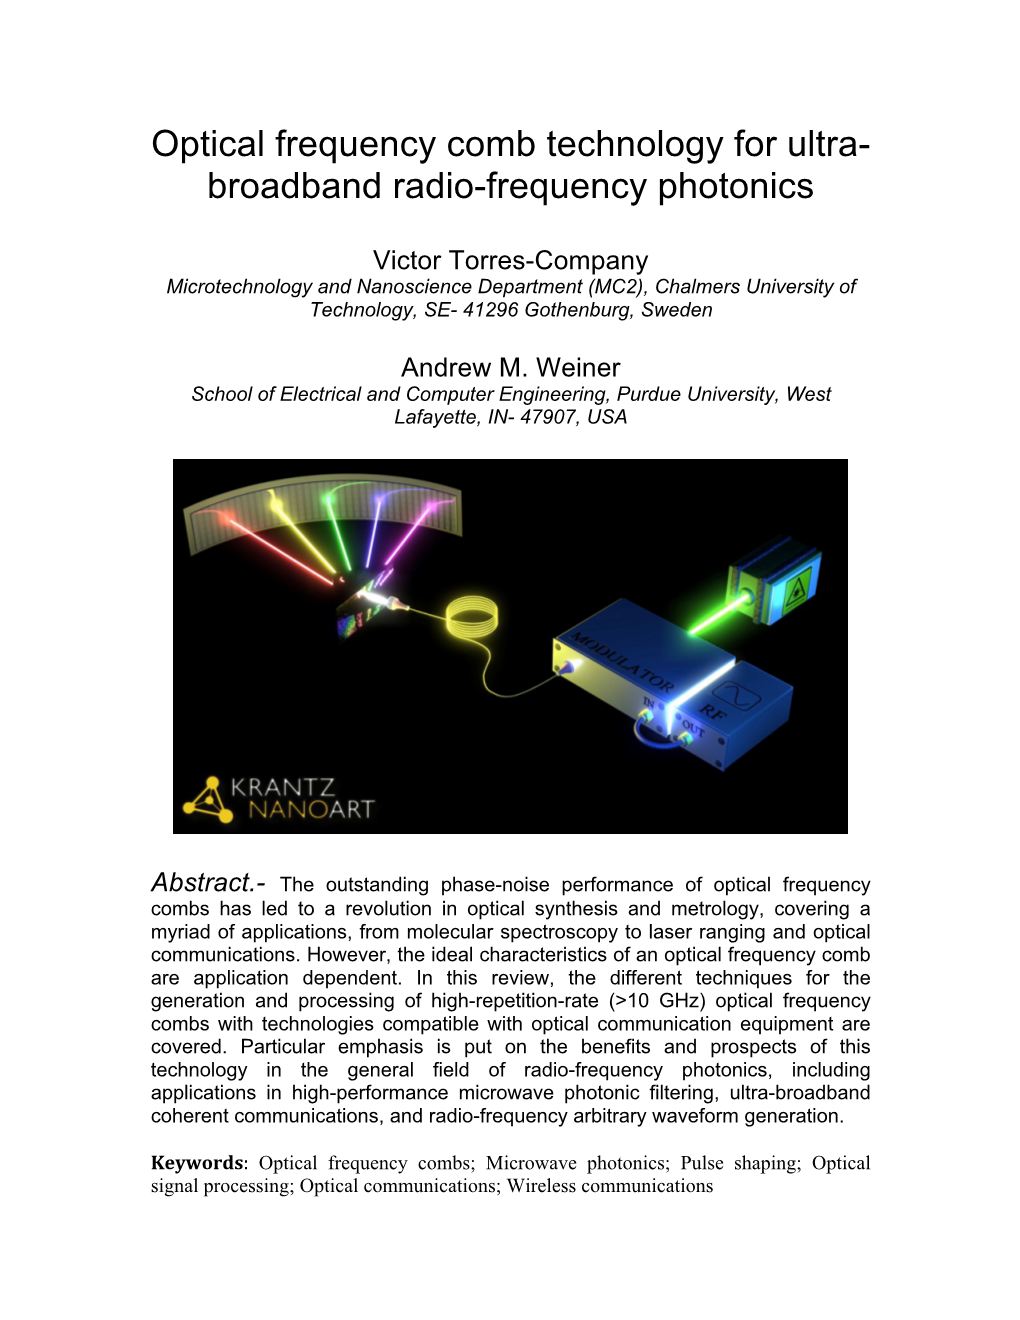 Optical Frequency Comb Technology for Ultra- Broadband Radio-Frequency Photonics